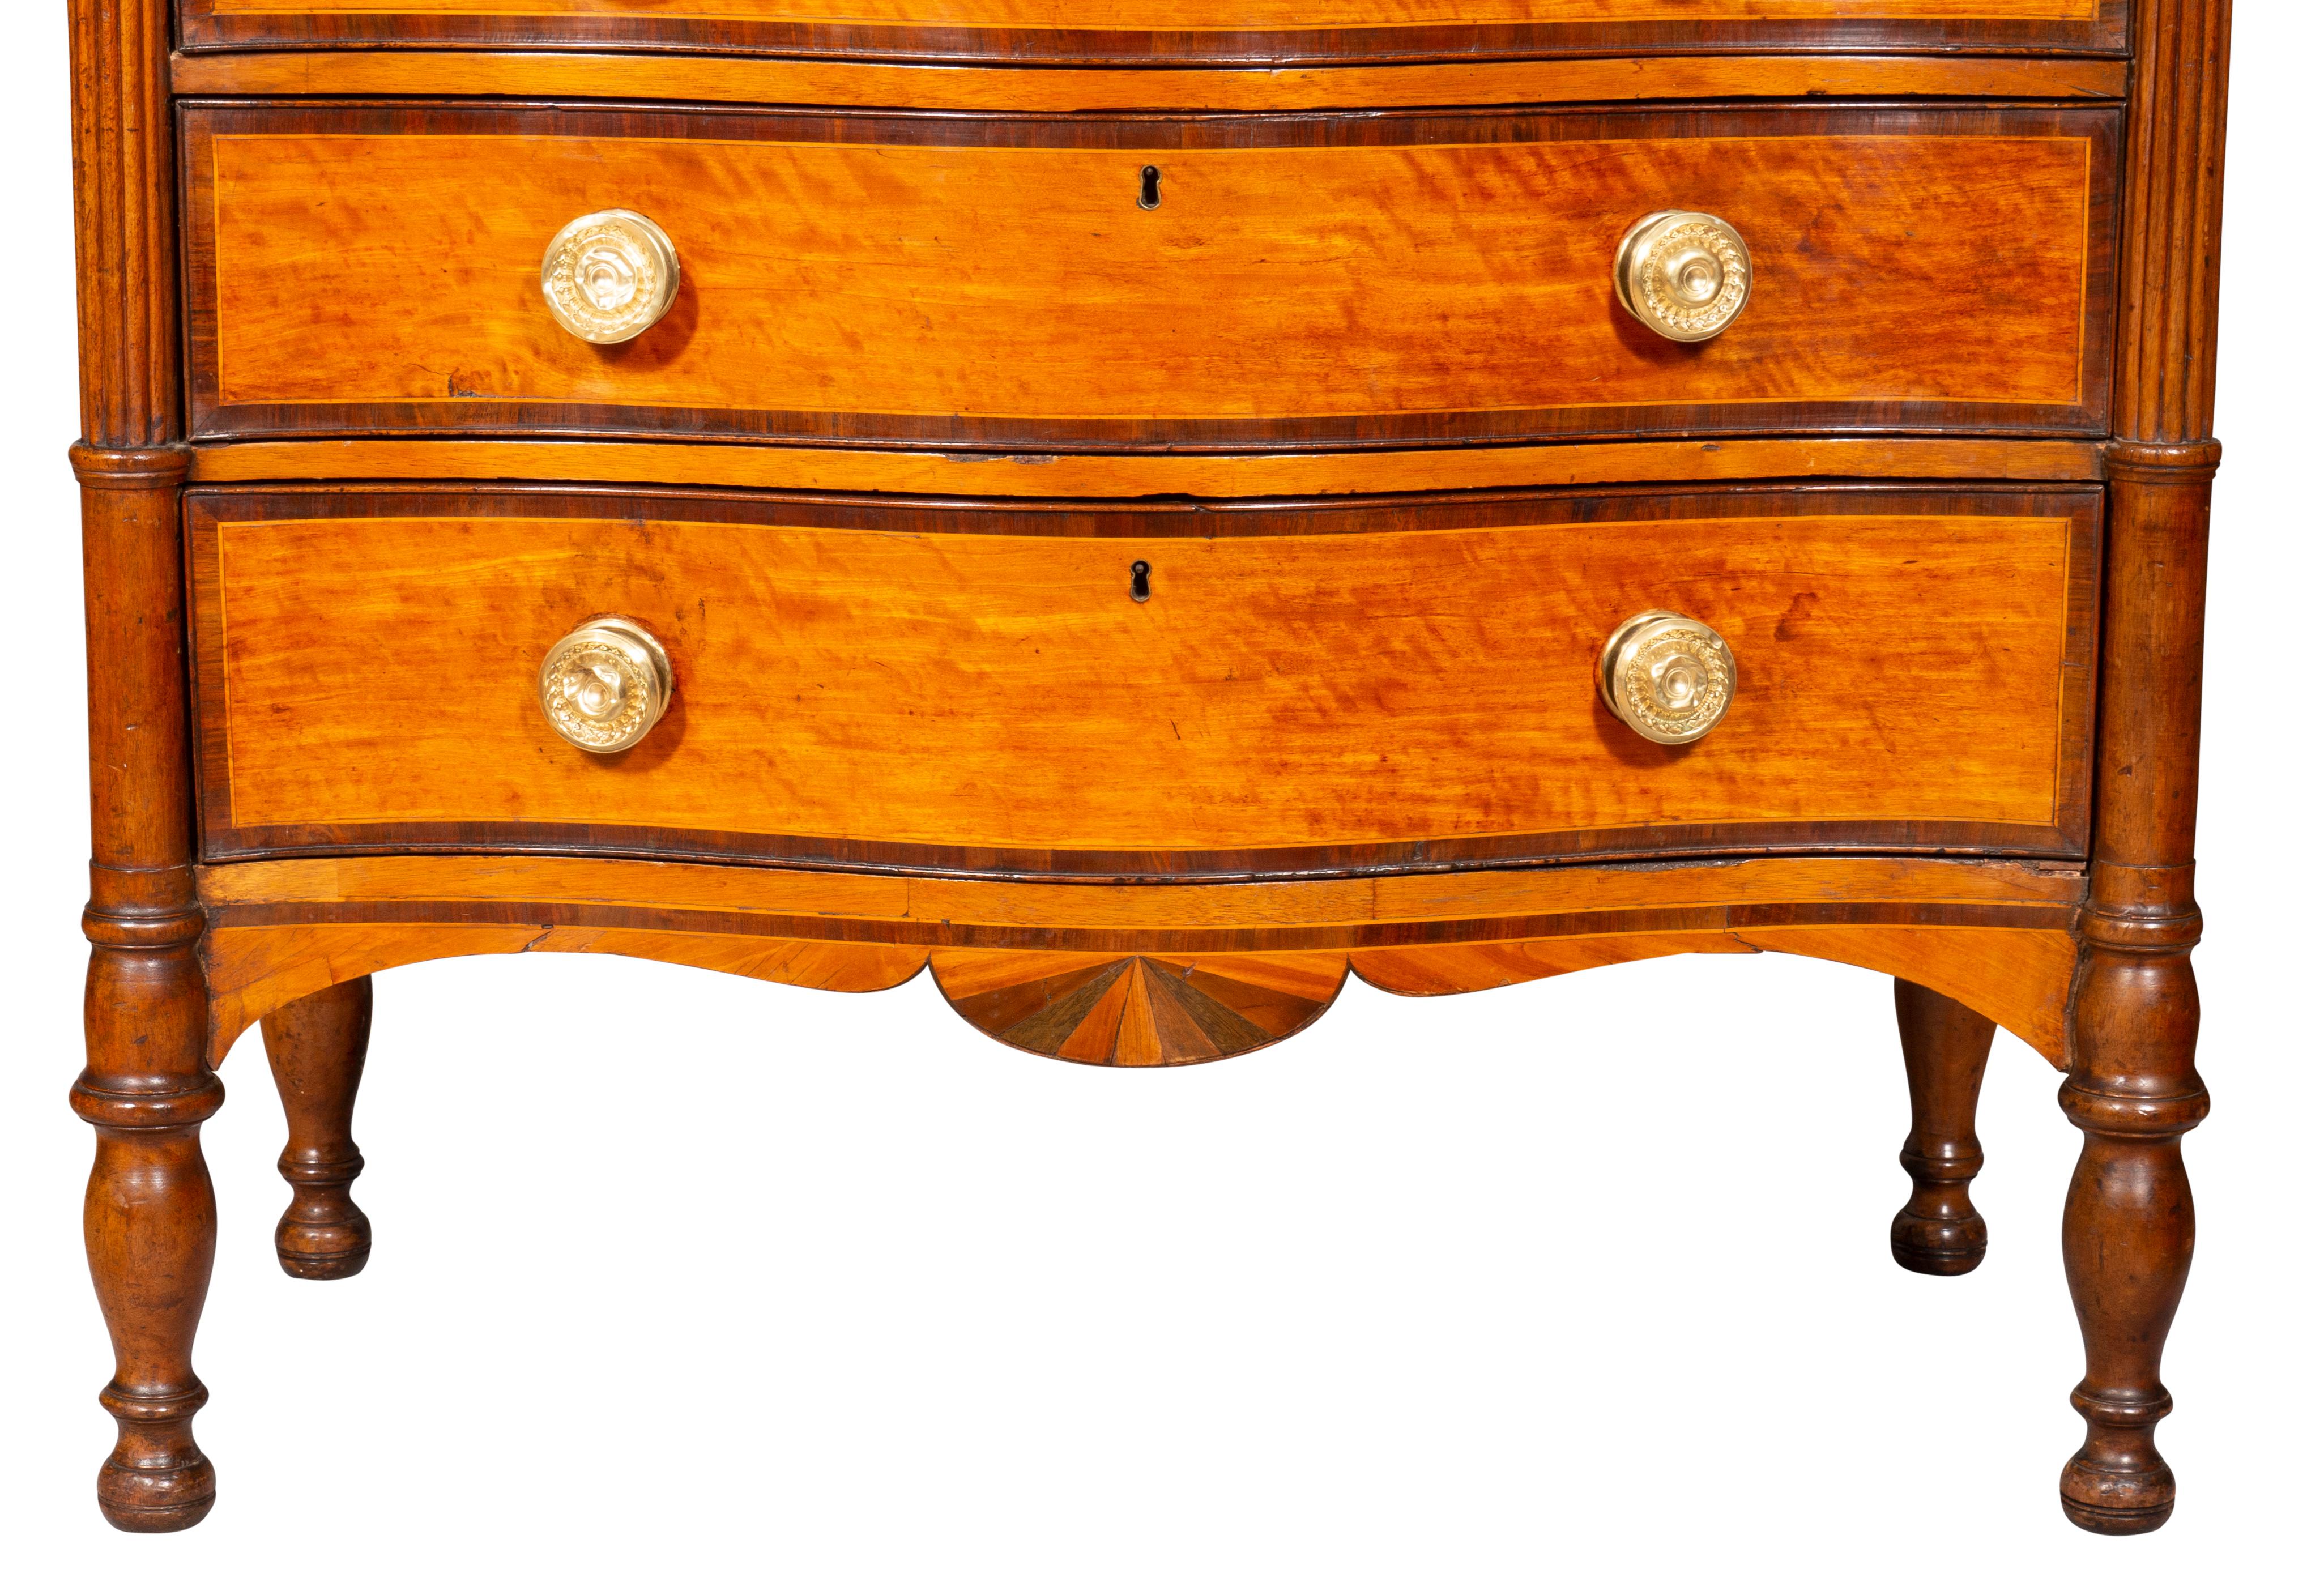 Regency Parquetry and Exotic Wood Chest of Drawers In Good Condition For Sale In Essex, MA